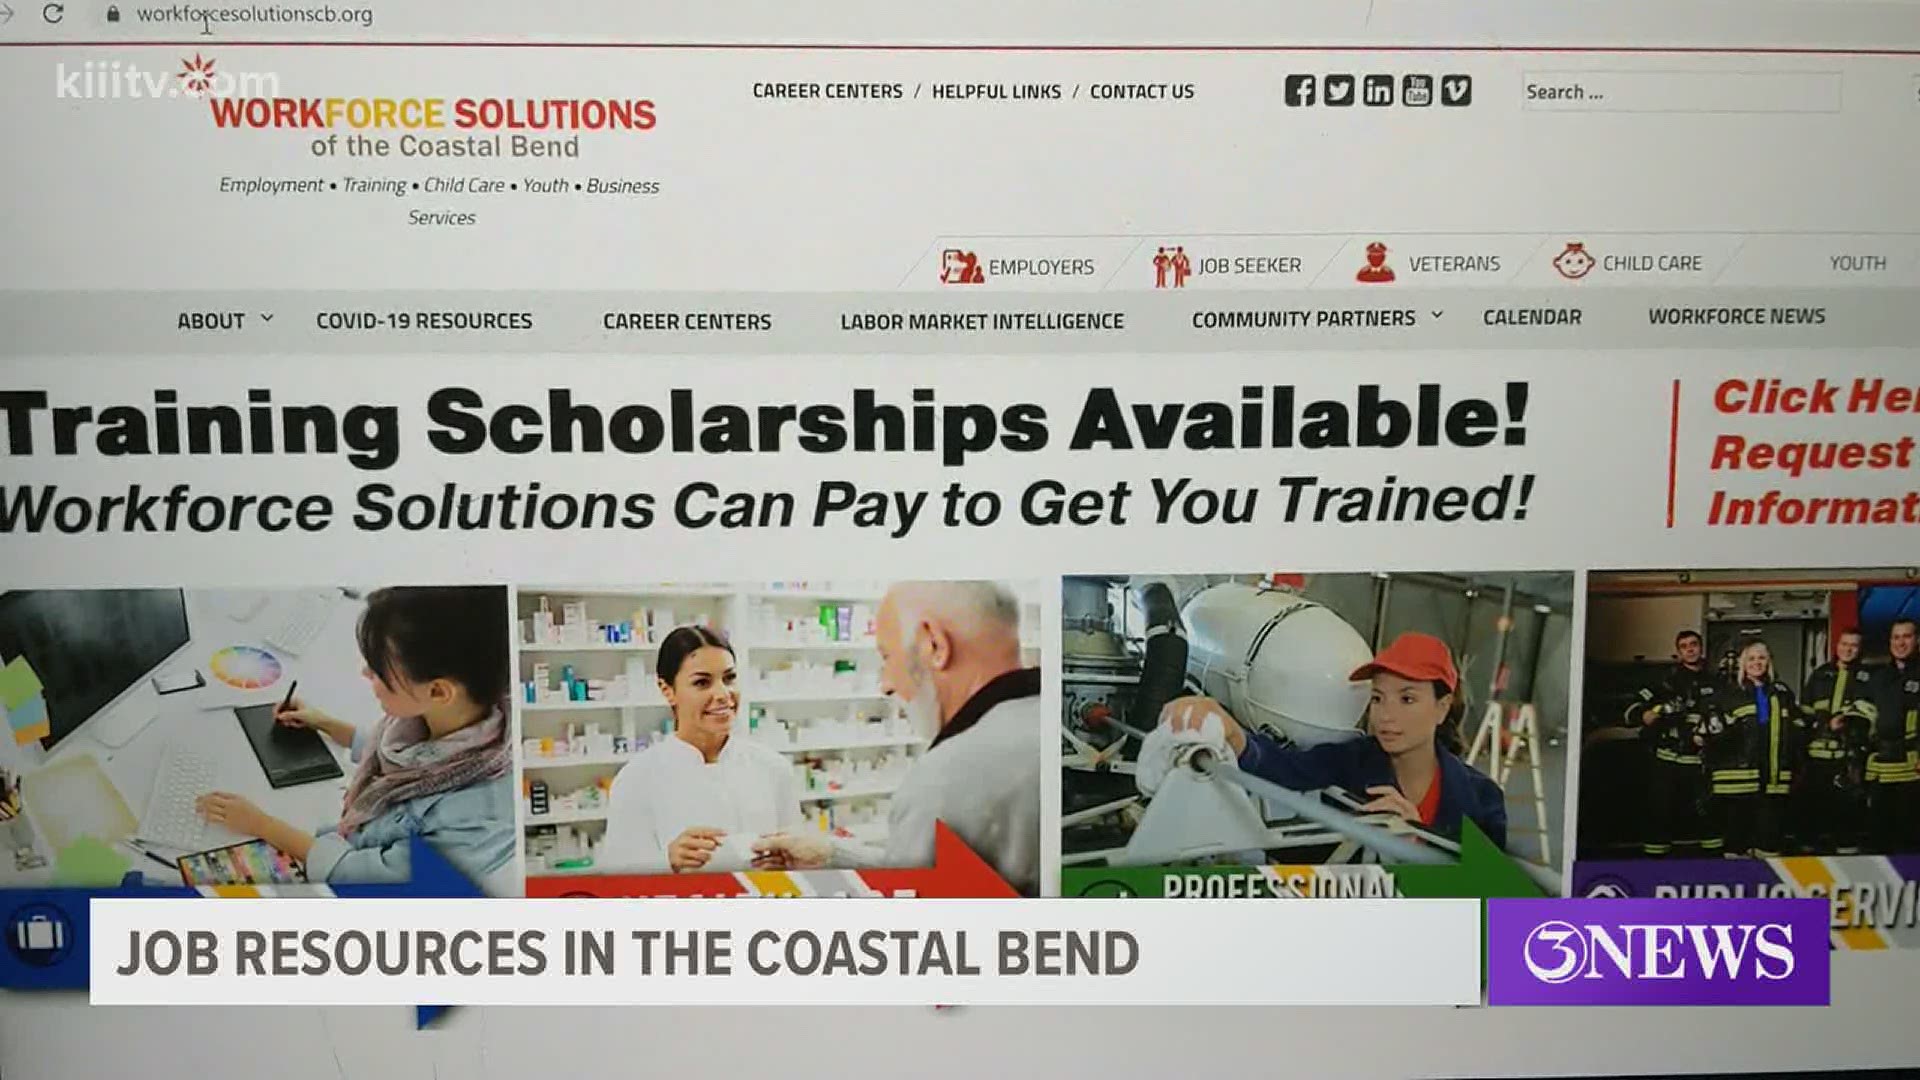 Officials with Workforce Solutions of the Coastal Bend said their main purpose is to bridge the gap between unemployment and employment.